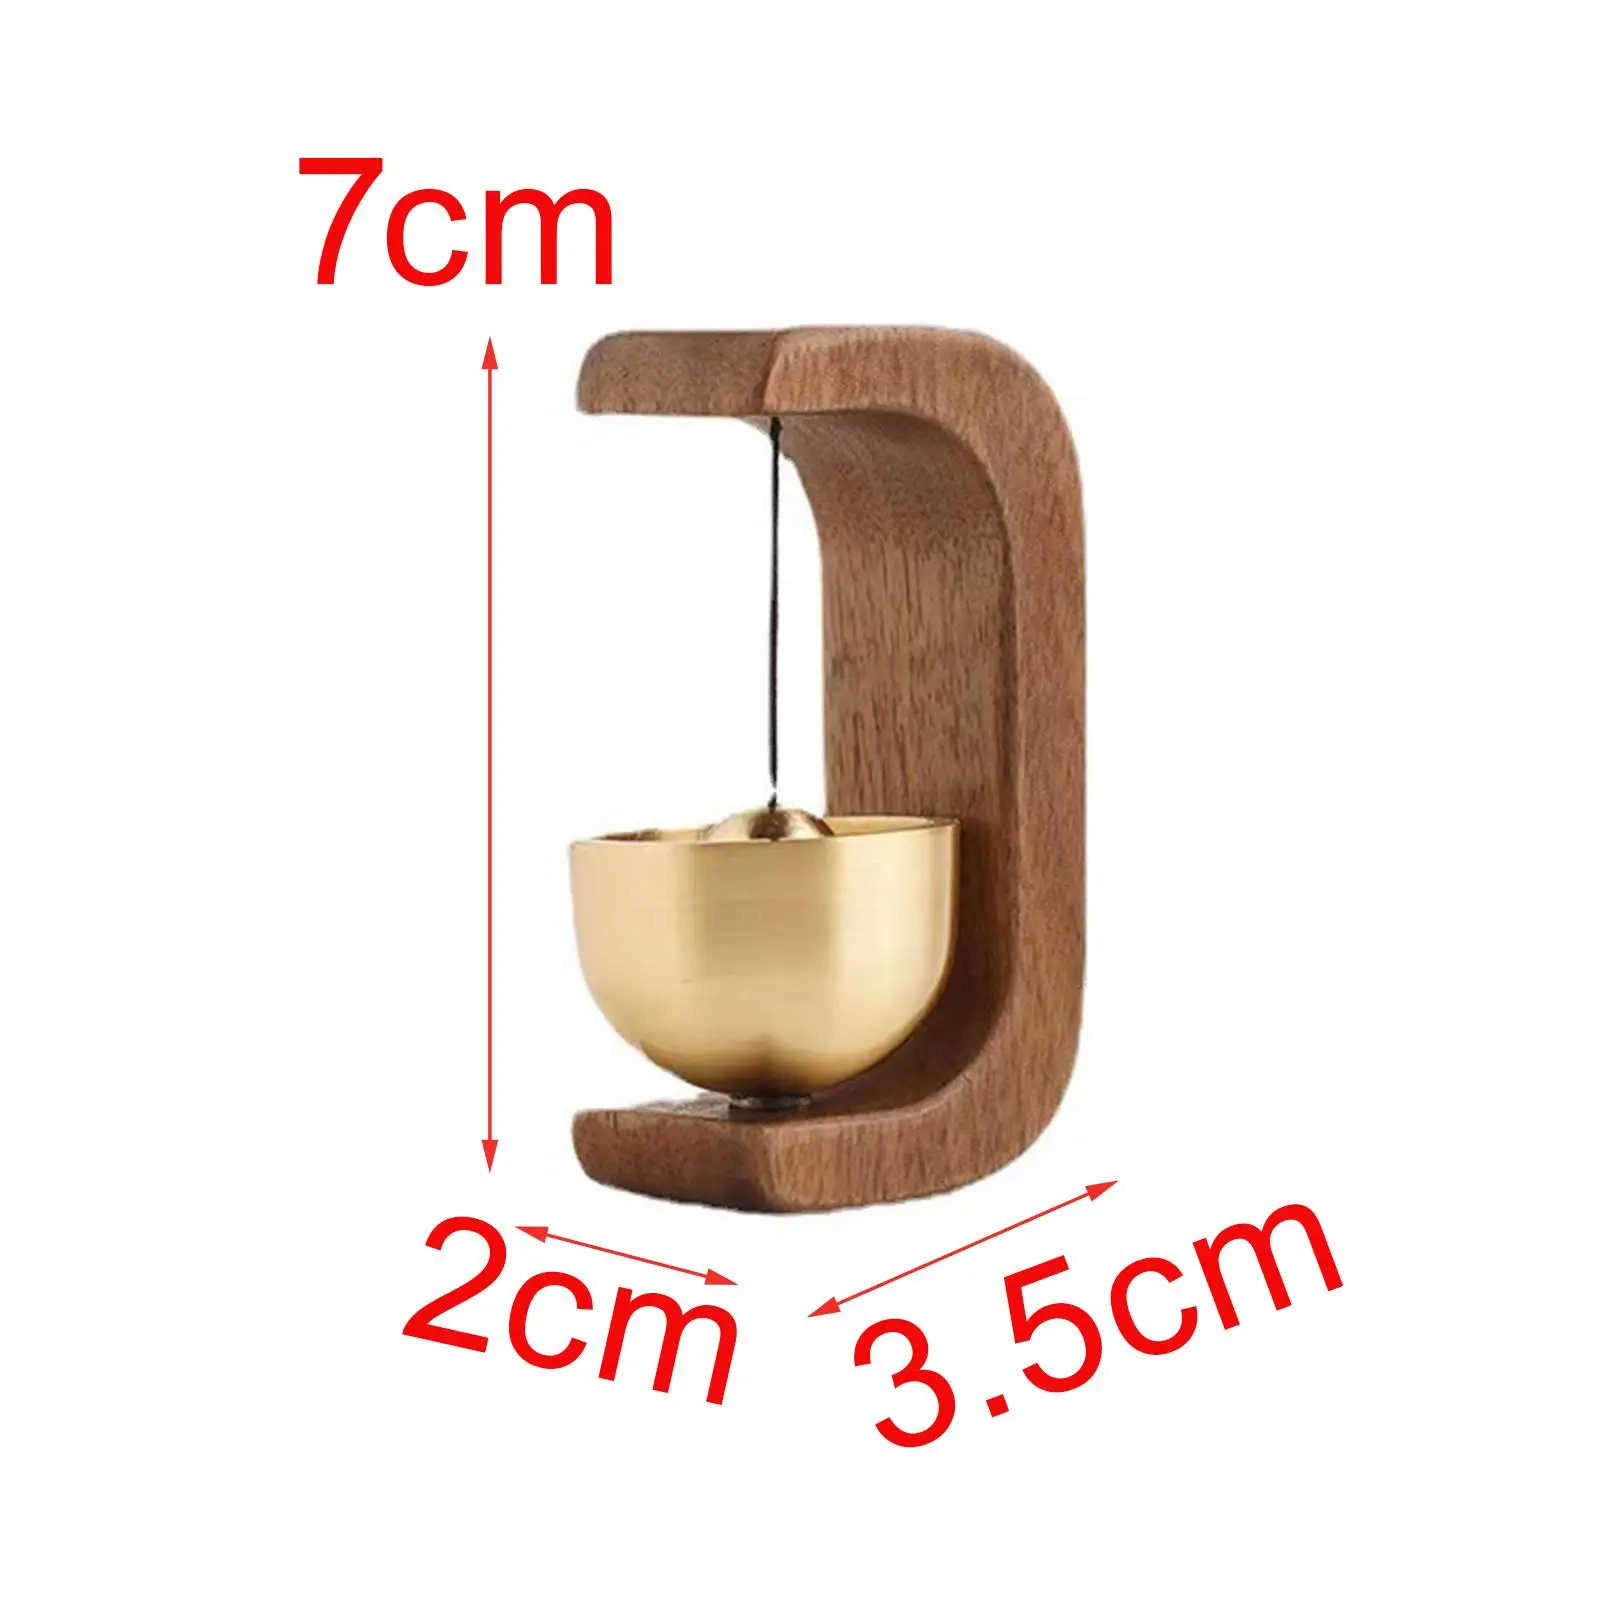 Shopkeepers Bell Magnetic Attached Decorative Hanging Decoration Small Doorbell Ornament for Garden Barn Entrance Business